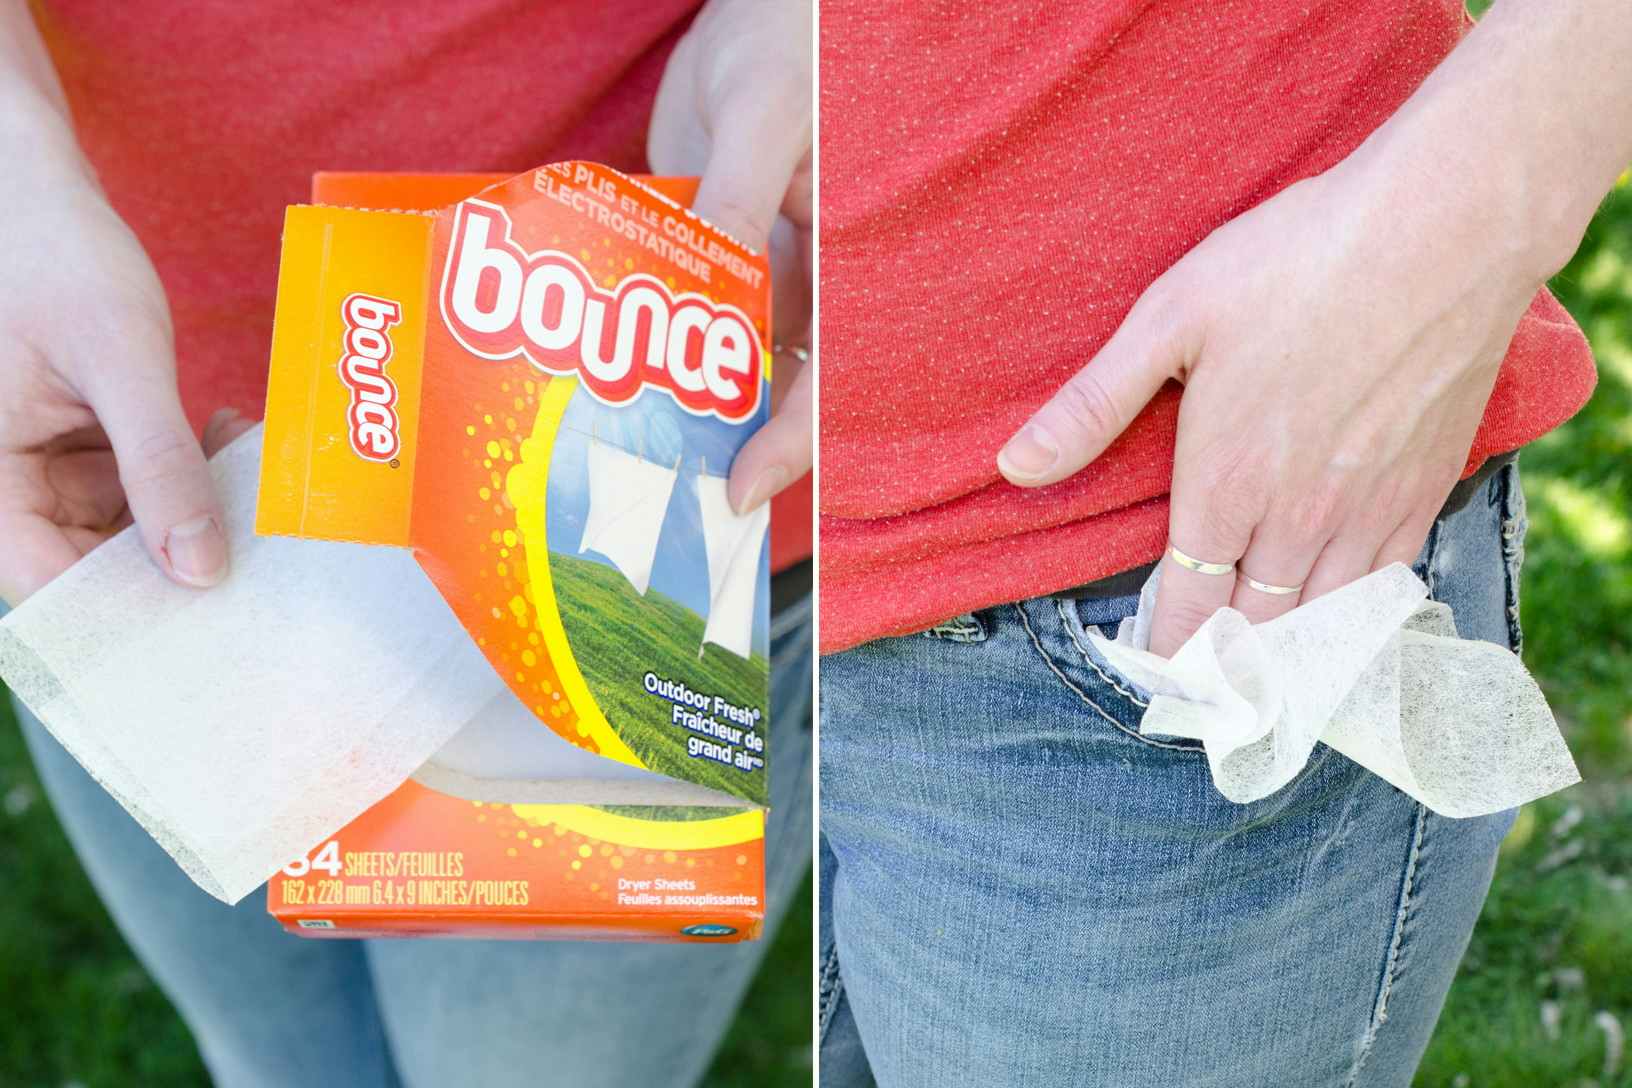 Someone pulling out Bounce dryer sheets and sticking them in her pocket as insect repellent